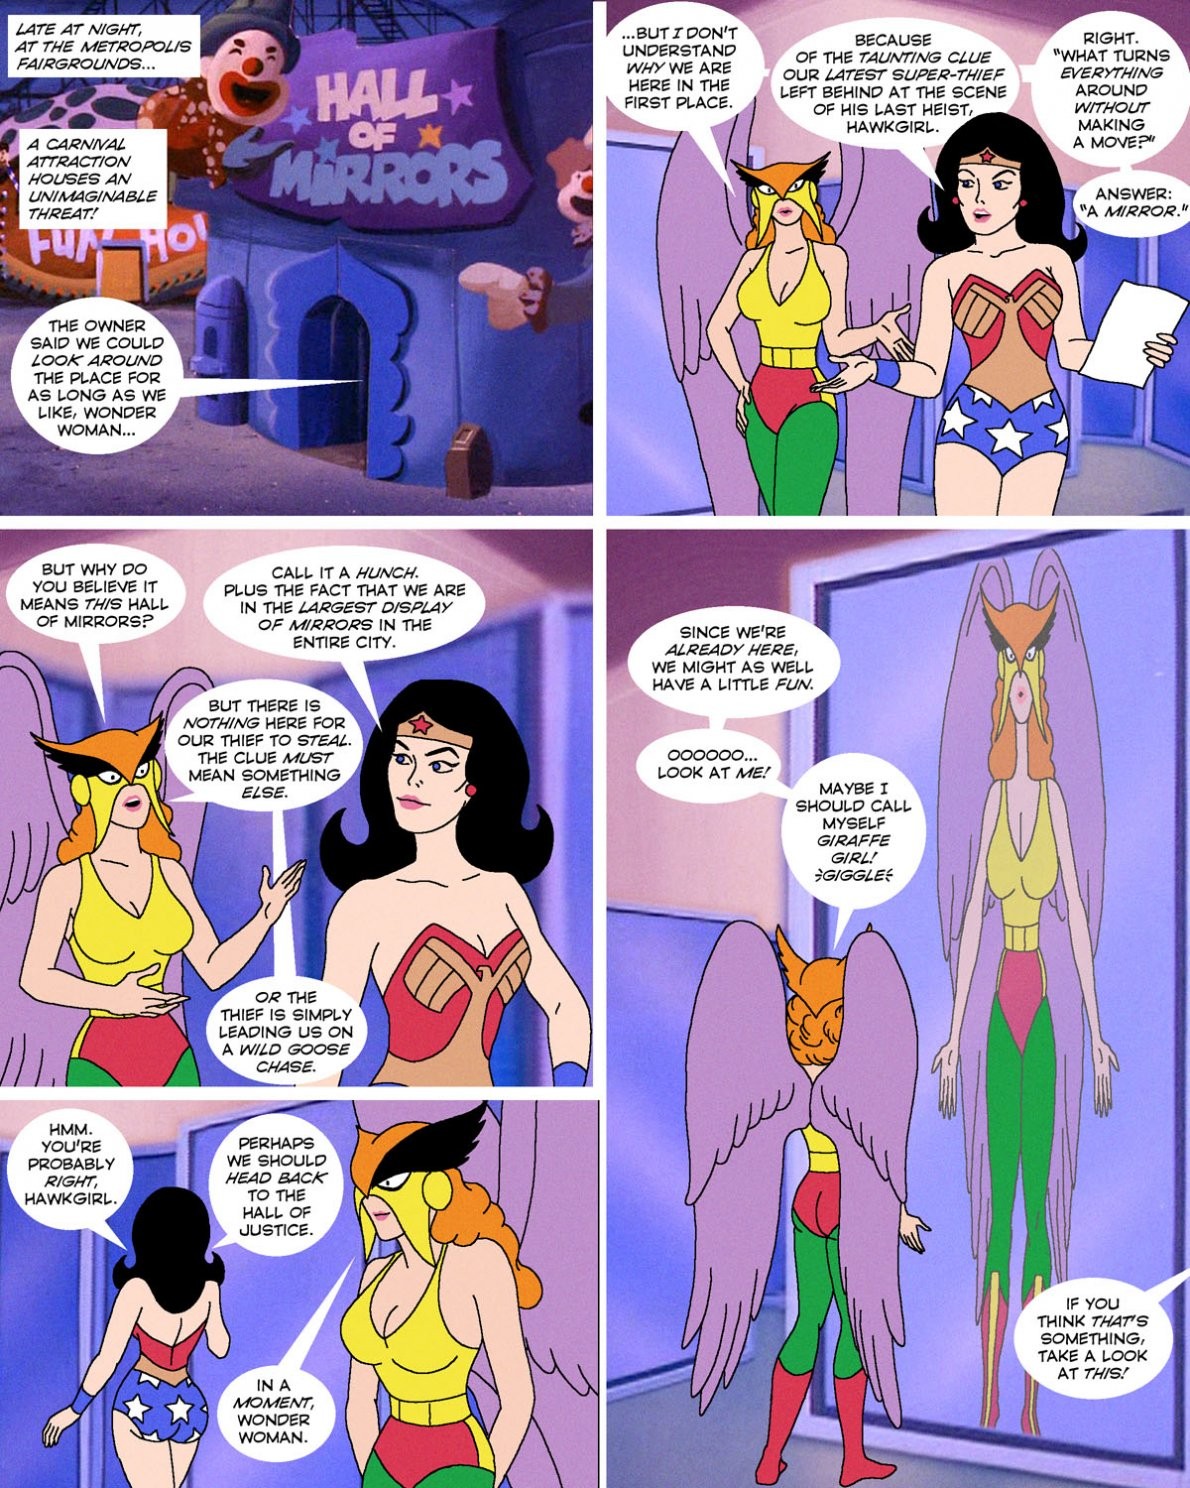 Super Friends with Benefits: Done with Mirrors porn comic picture 2